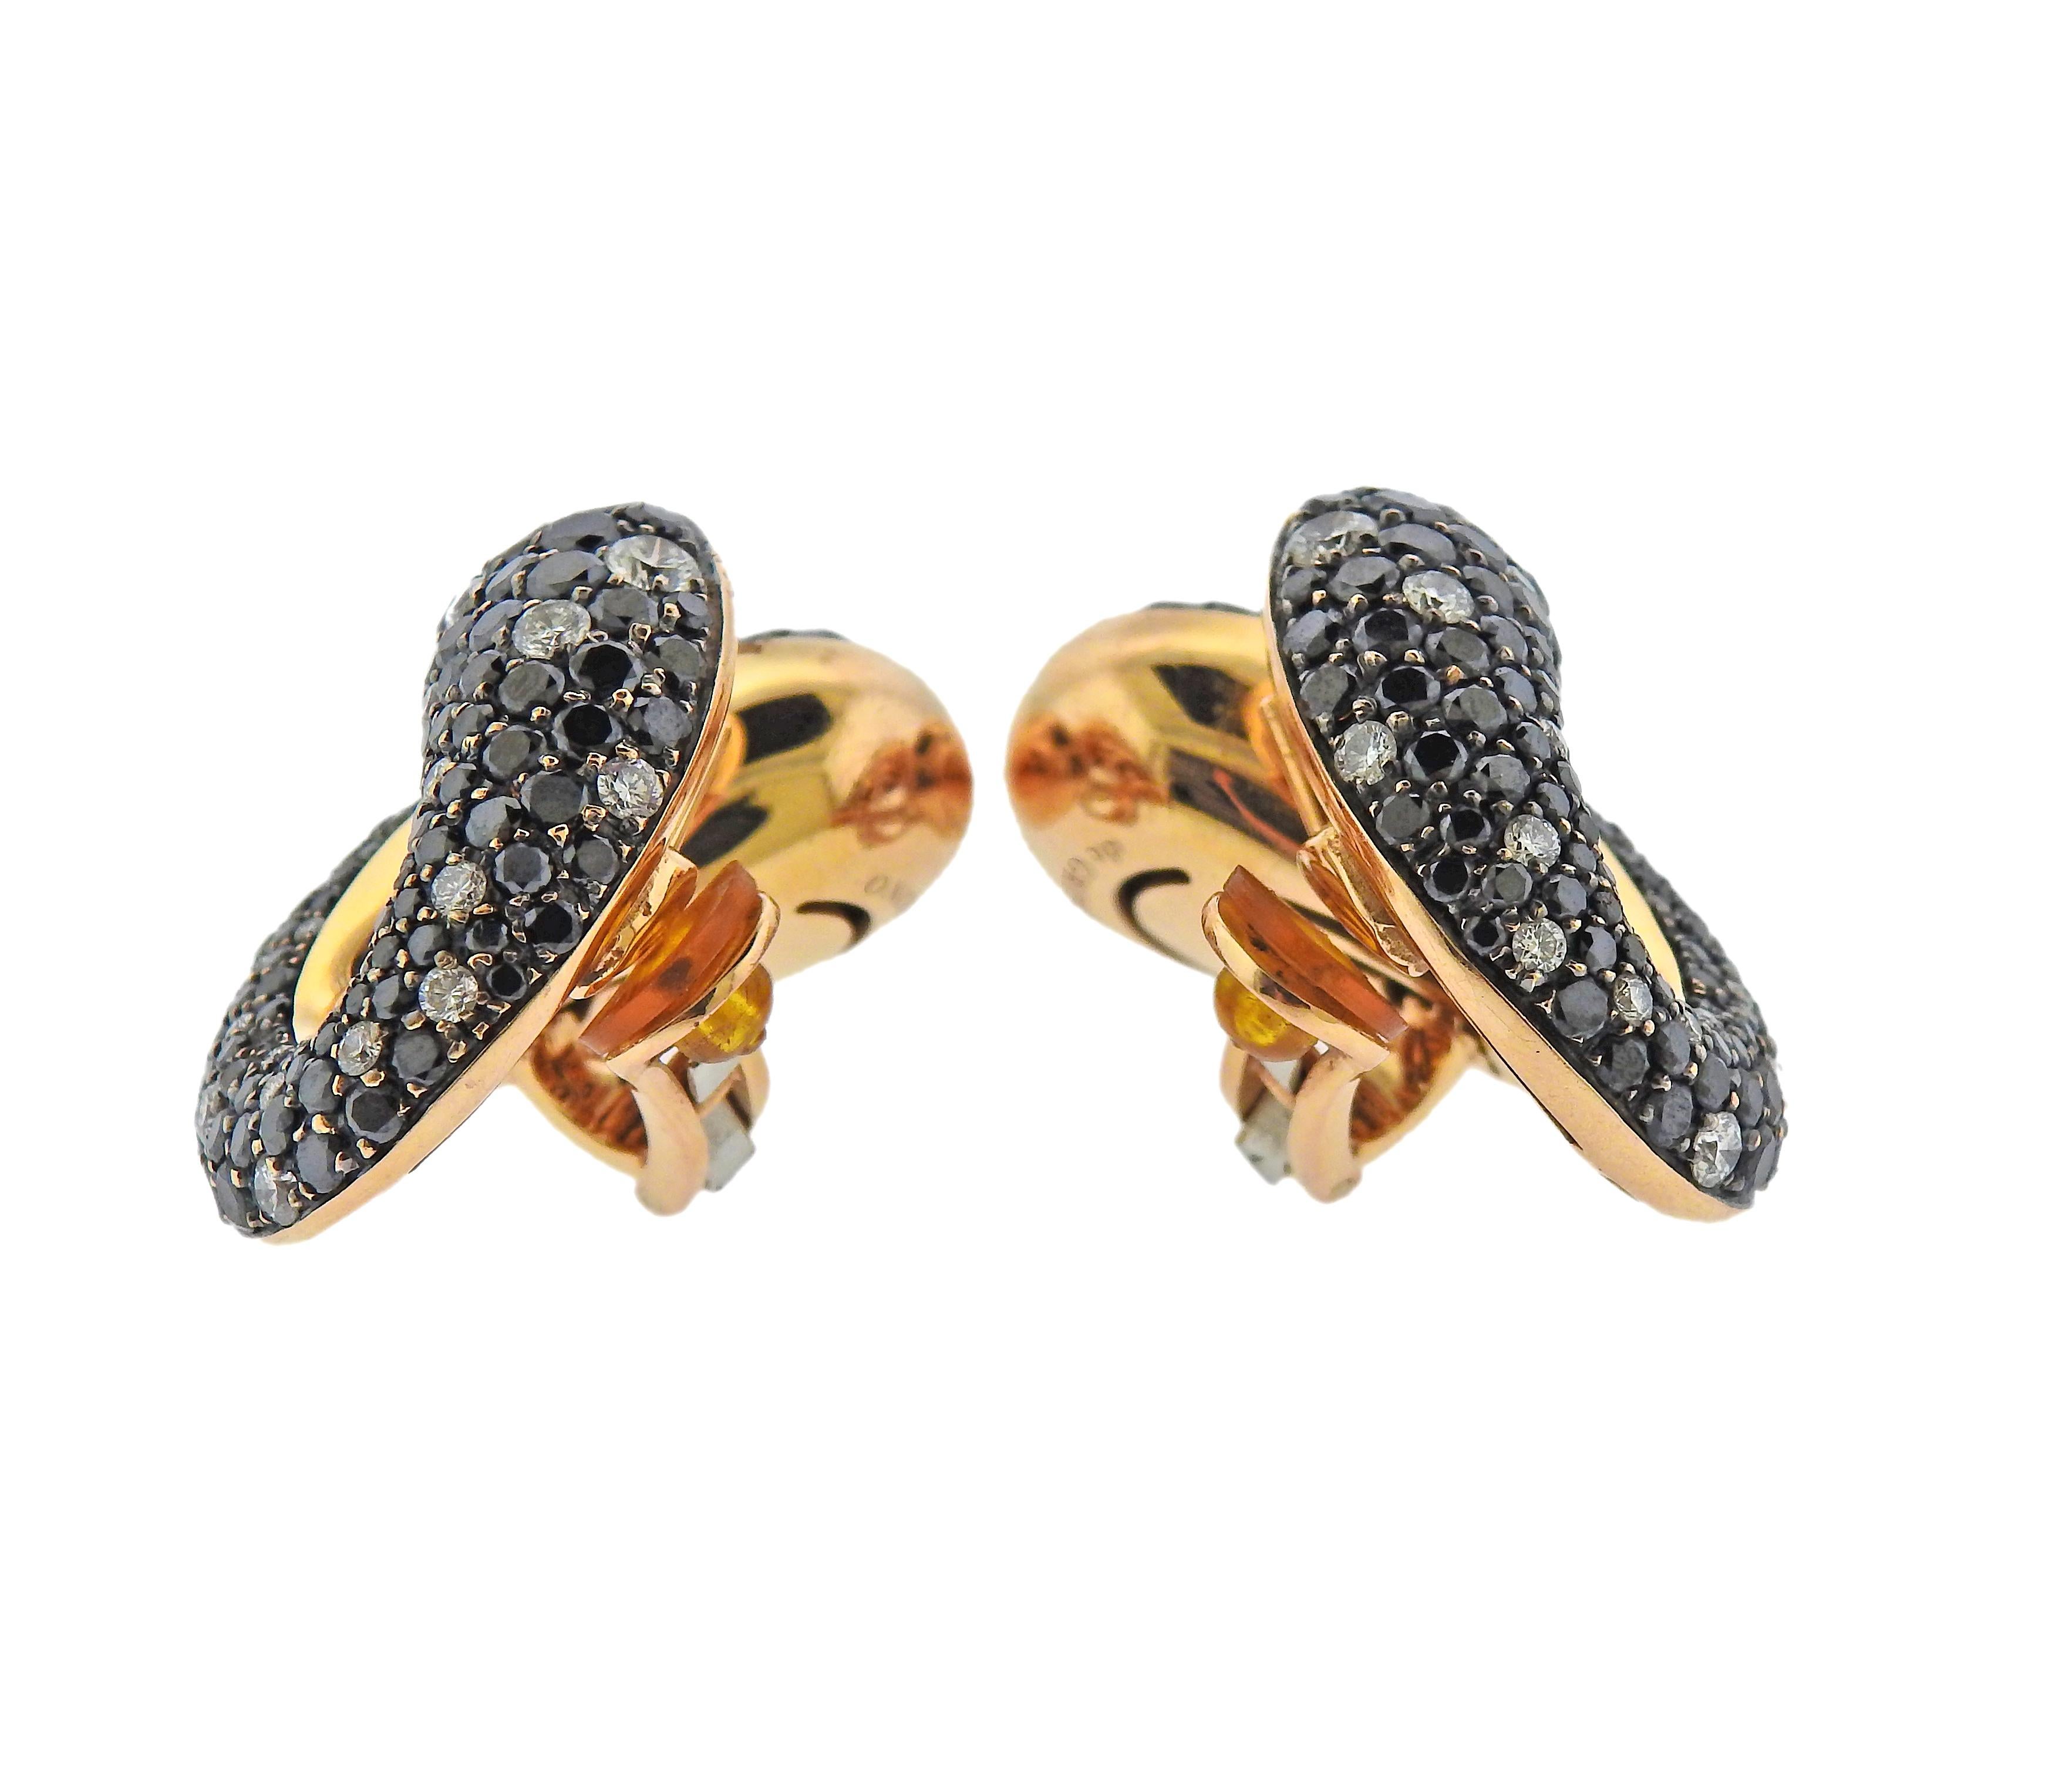 Pair of exquisite 18k rose gold Contrario earrings by de Grisogono, with 9.10ctw in black and 2.60ctw G/VVS diamonds. Come with COA and box. Earrings are 35mm x 25mm. Weight - 36.3 grams. Marked: B 15066, de Grisogono, 750.